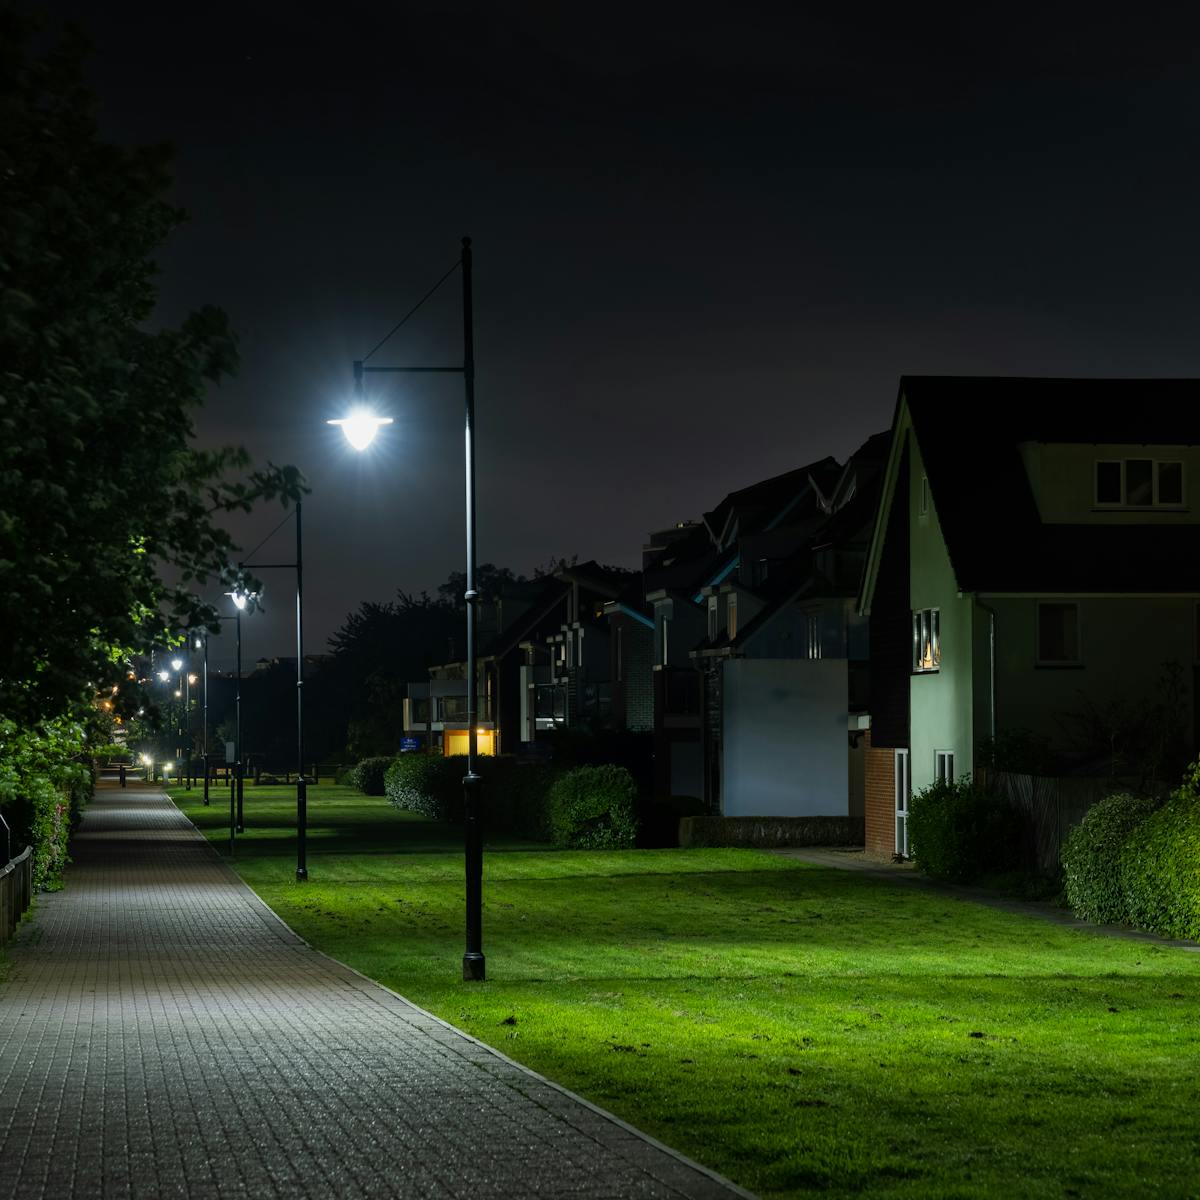 A photograph of a pathway at night which is lined by a row of street lights. The lights illuminate the trees and lawns next to the path as well as a row of houses, the gardens of which also has light cast on them.